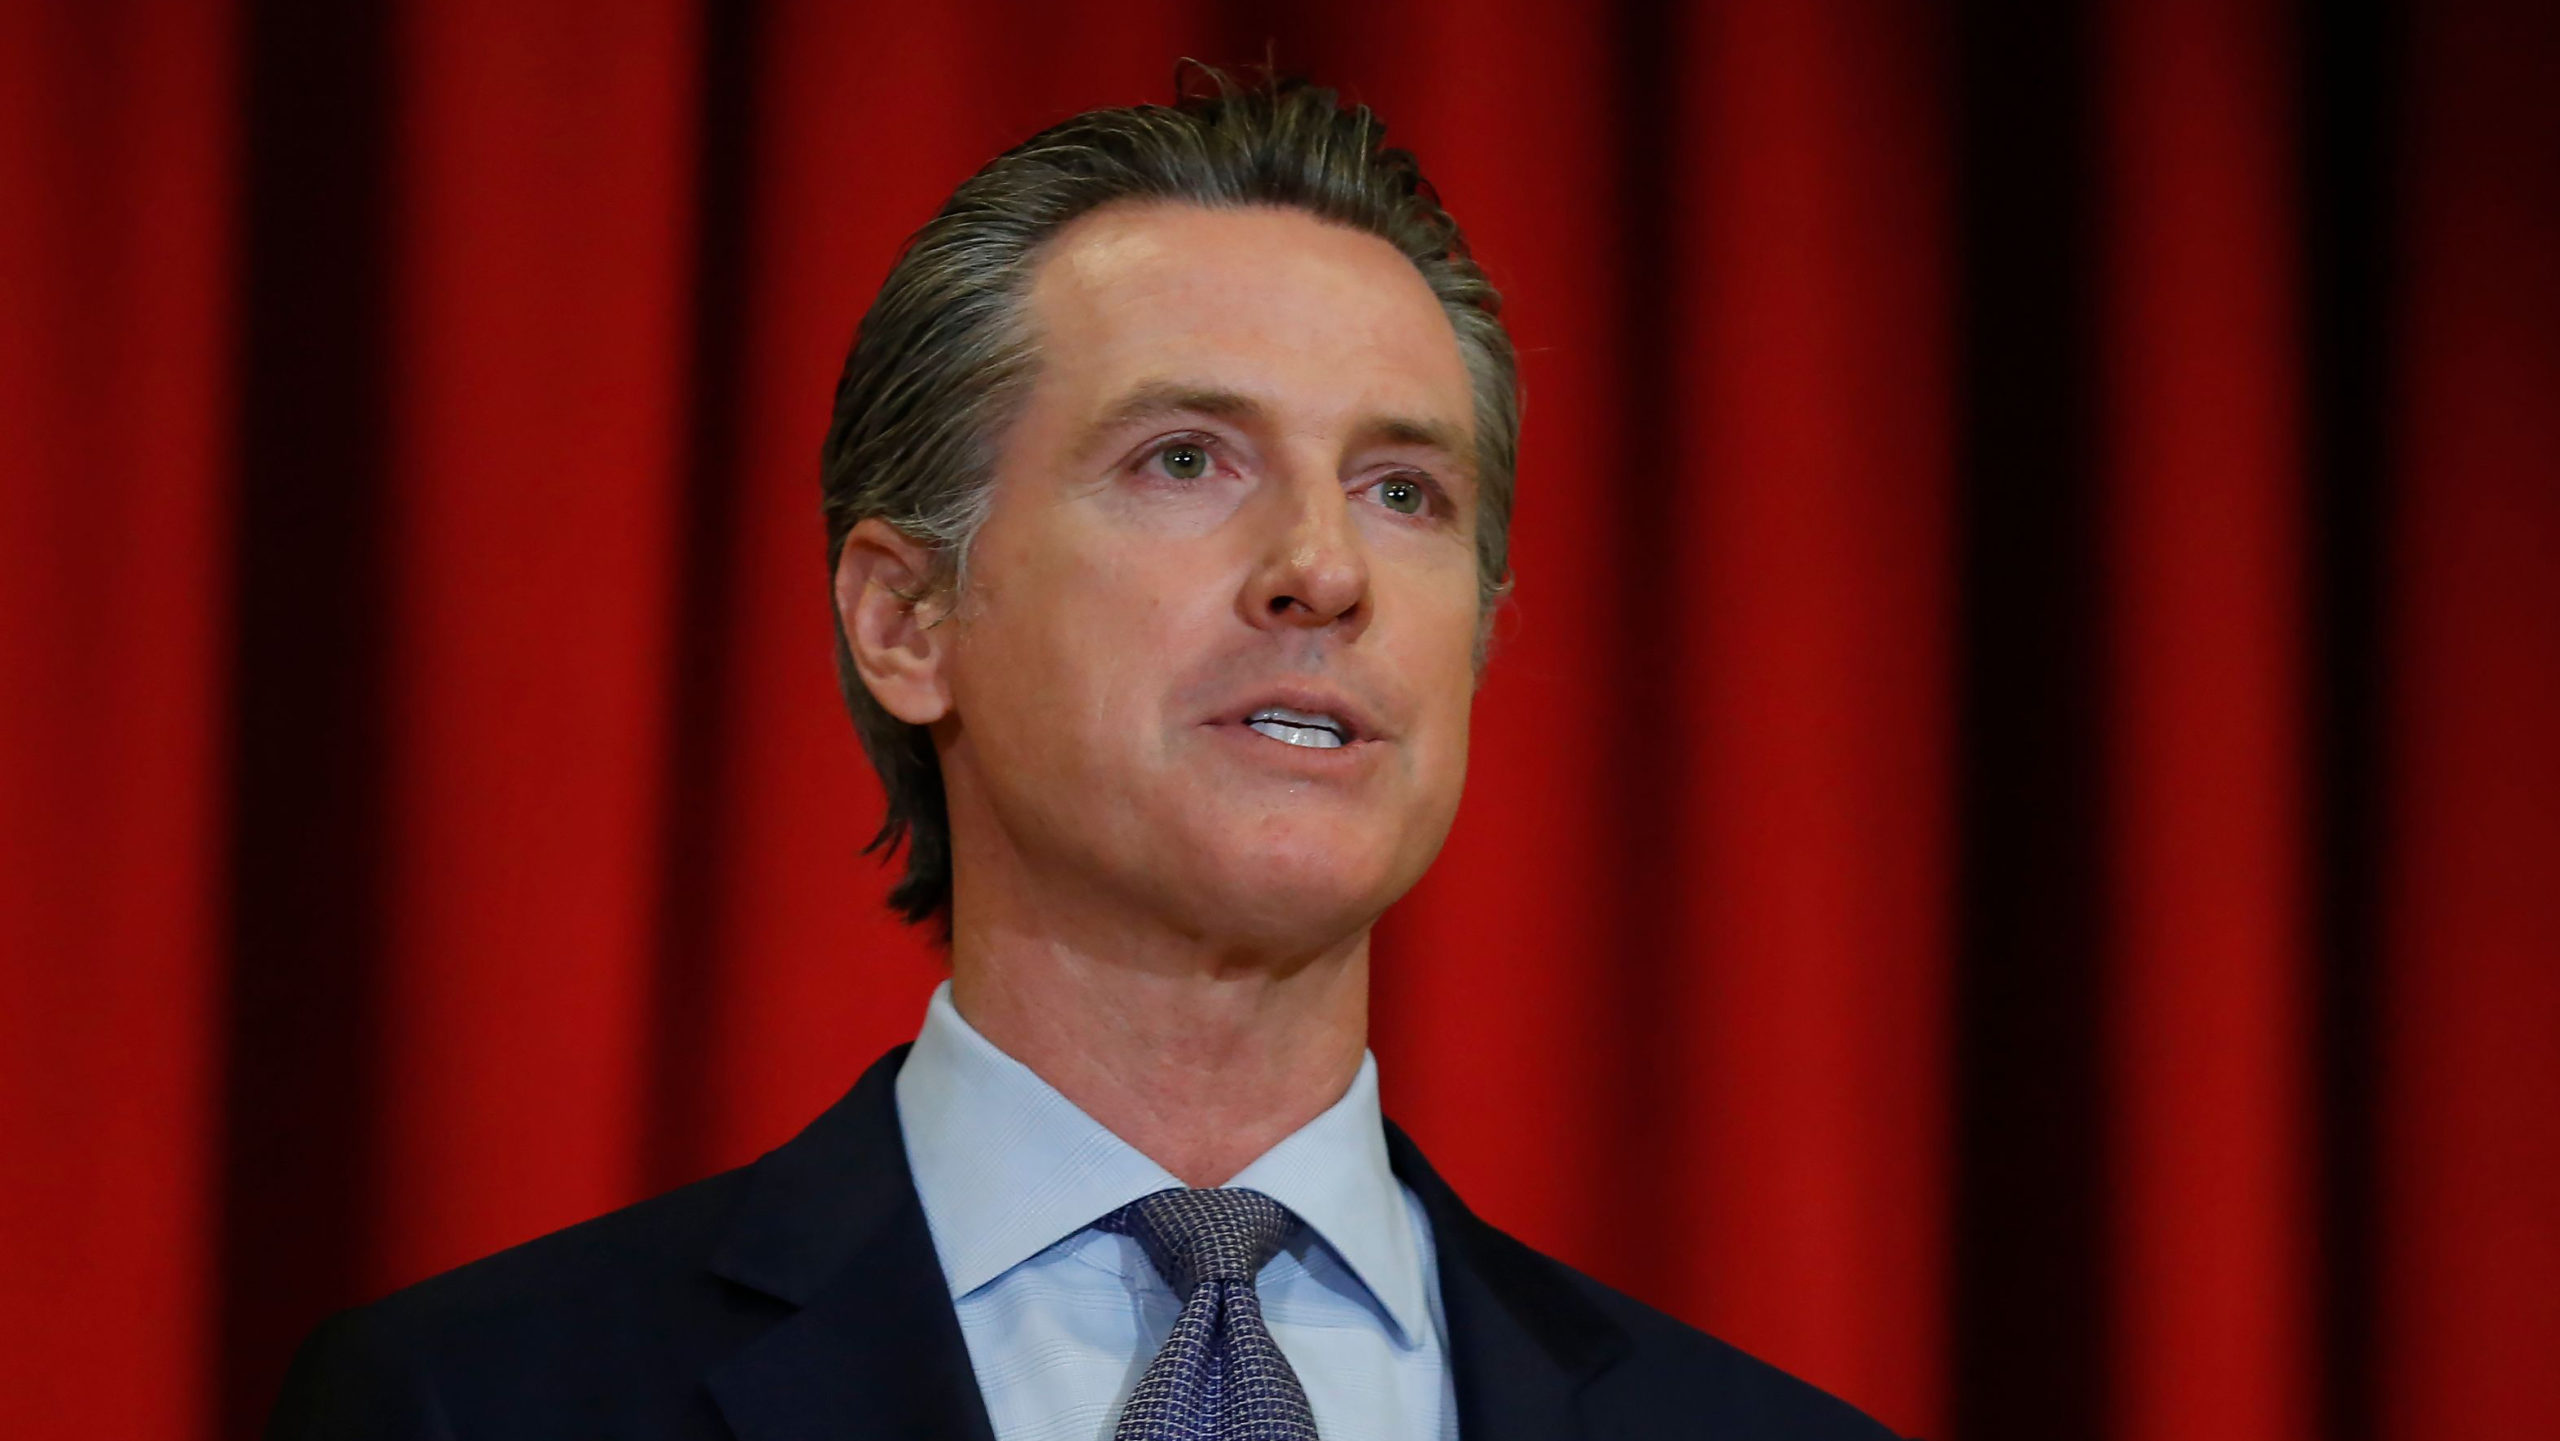 Gov. Newsom signs orders to roll back coronavirus restrictions, finally ending stay-at-home order - The US Armenians